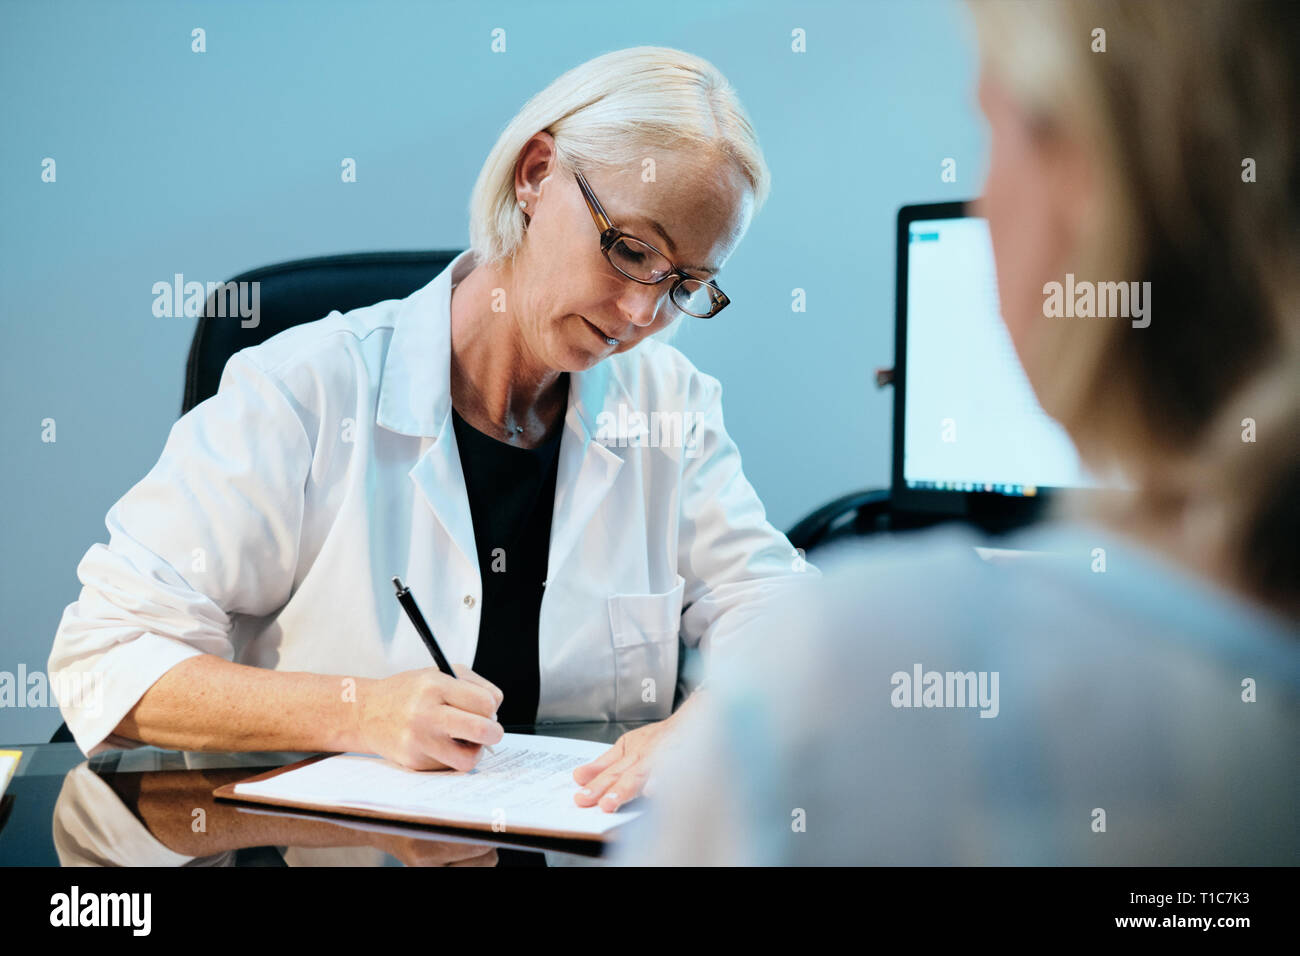 Health Care Worker Talking To Sick Senior Patient In Hospital Stock Photo